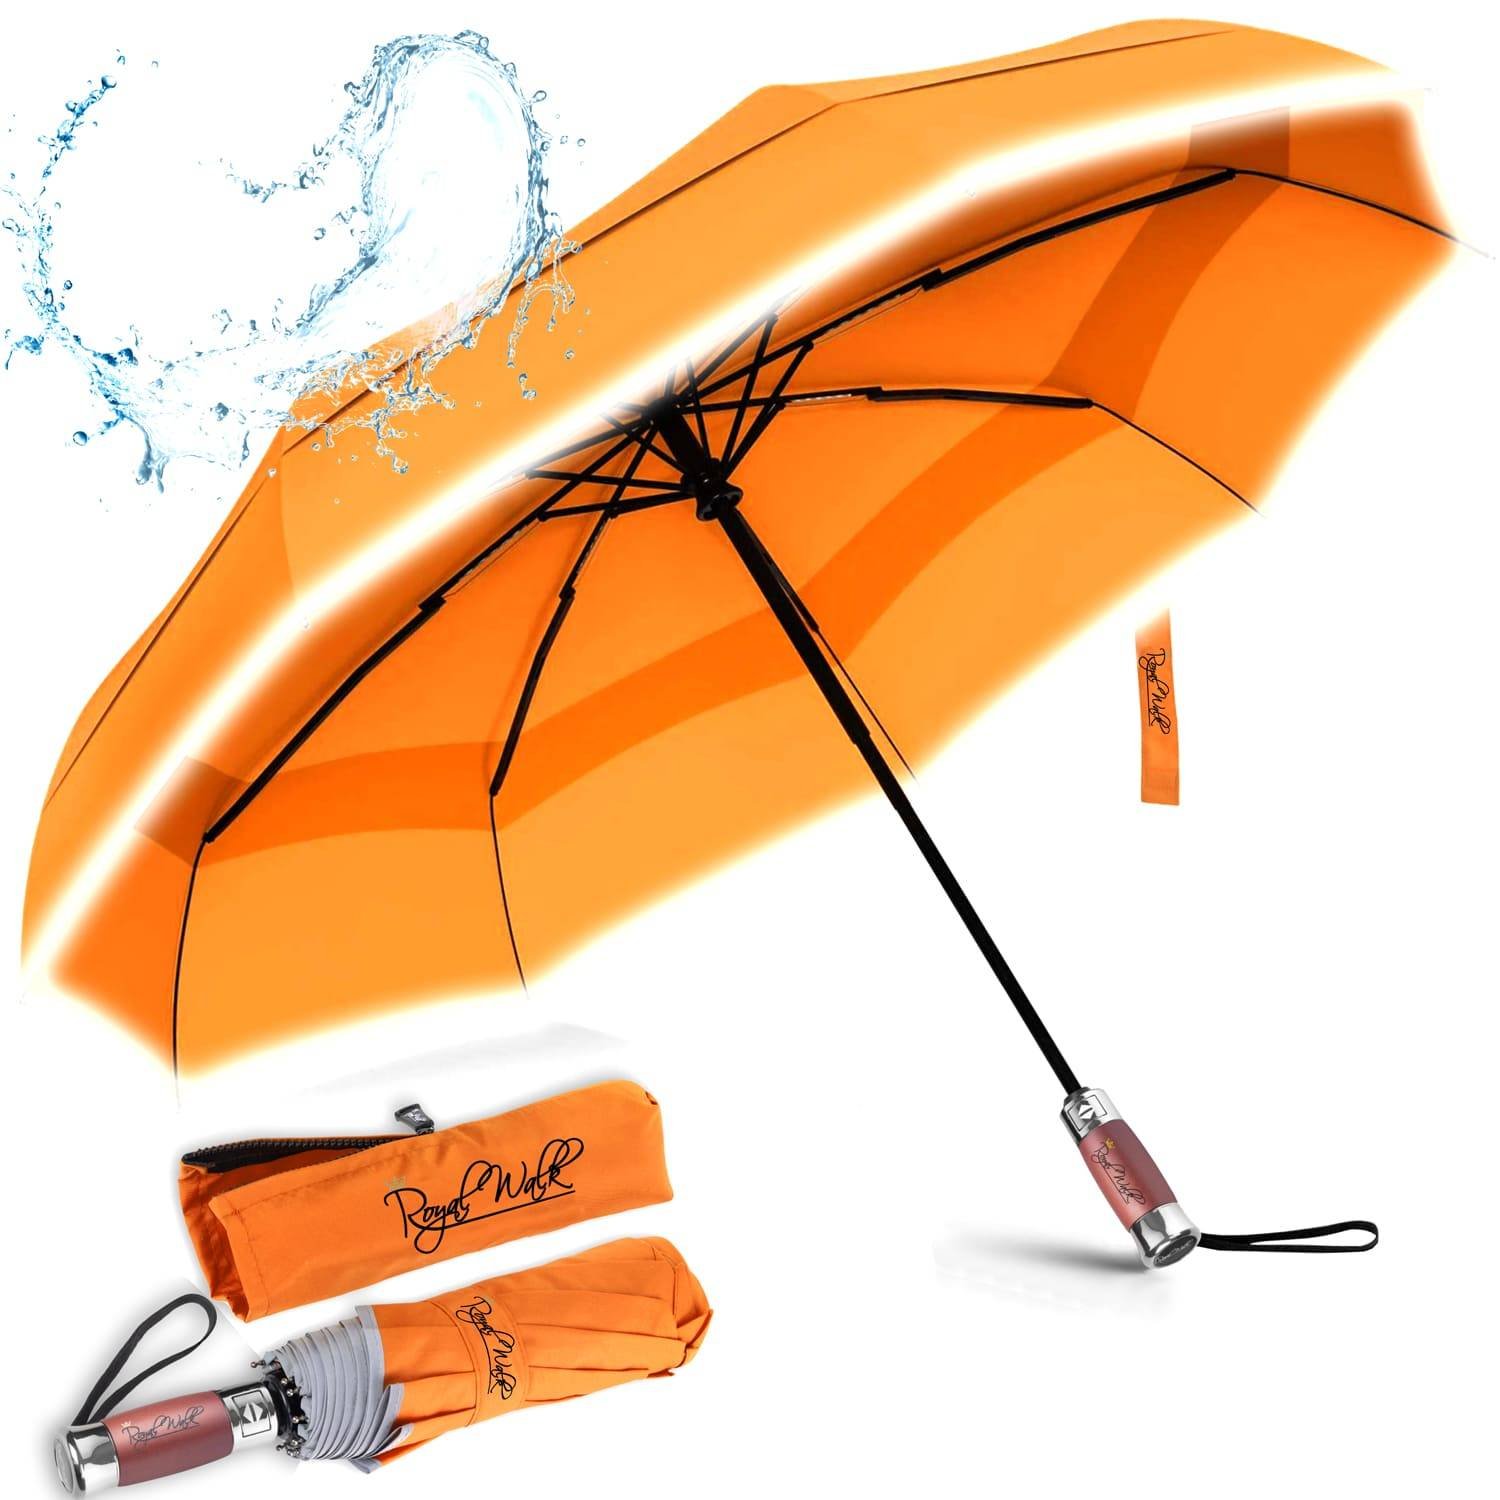 folding windproof umbrella for rain compact vented double canopy wood handle automatic open close 41 inch 103 cm orange 1500